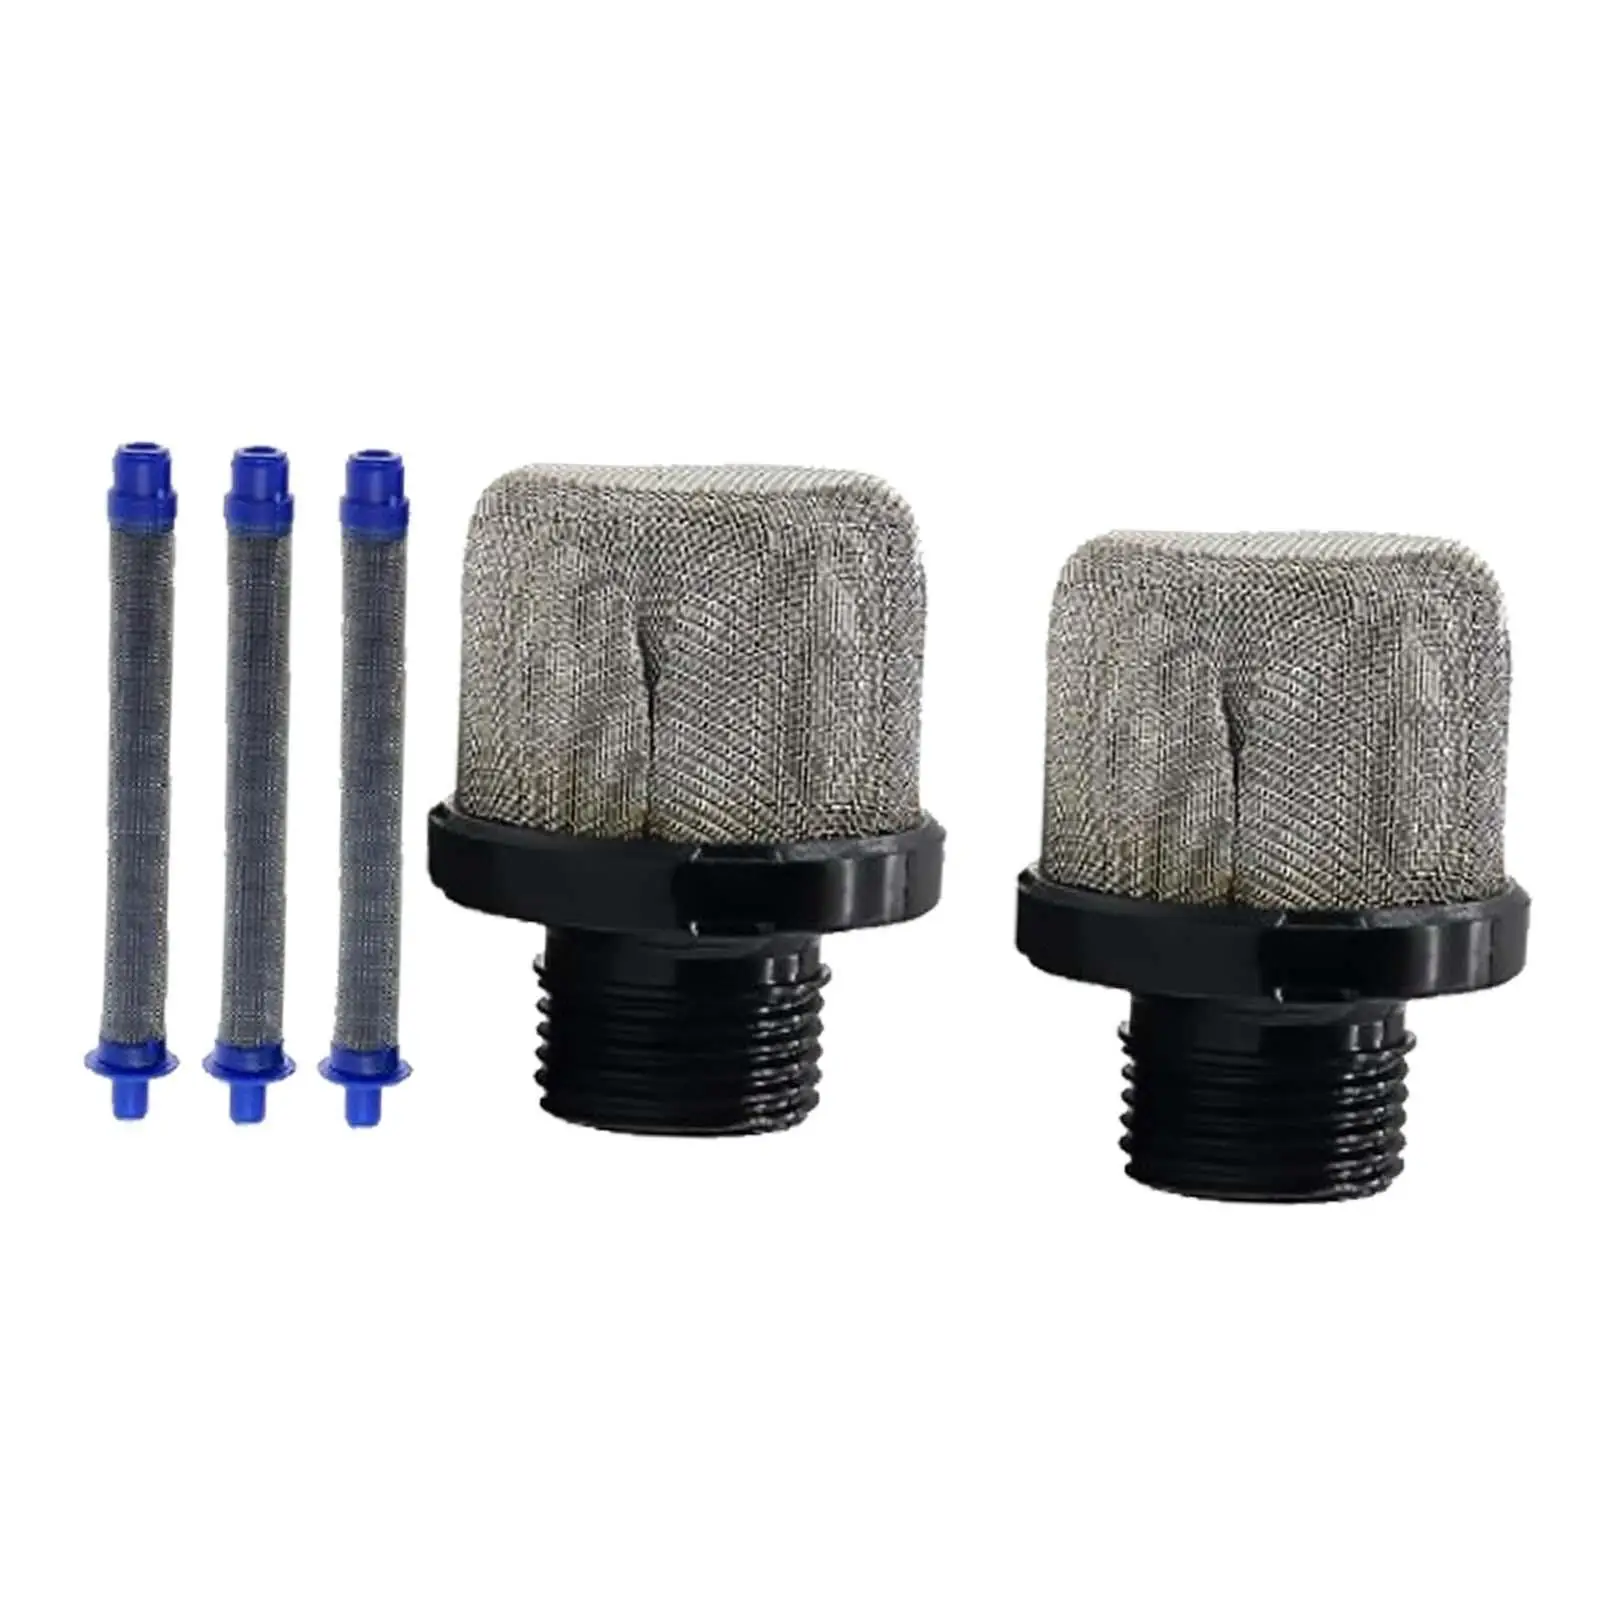 Airless Spray Machine 2x 288716 Screen and 3x 288749 Filter Kit Durable 3/4inch Inlet Strainer Thread Combination Replacements